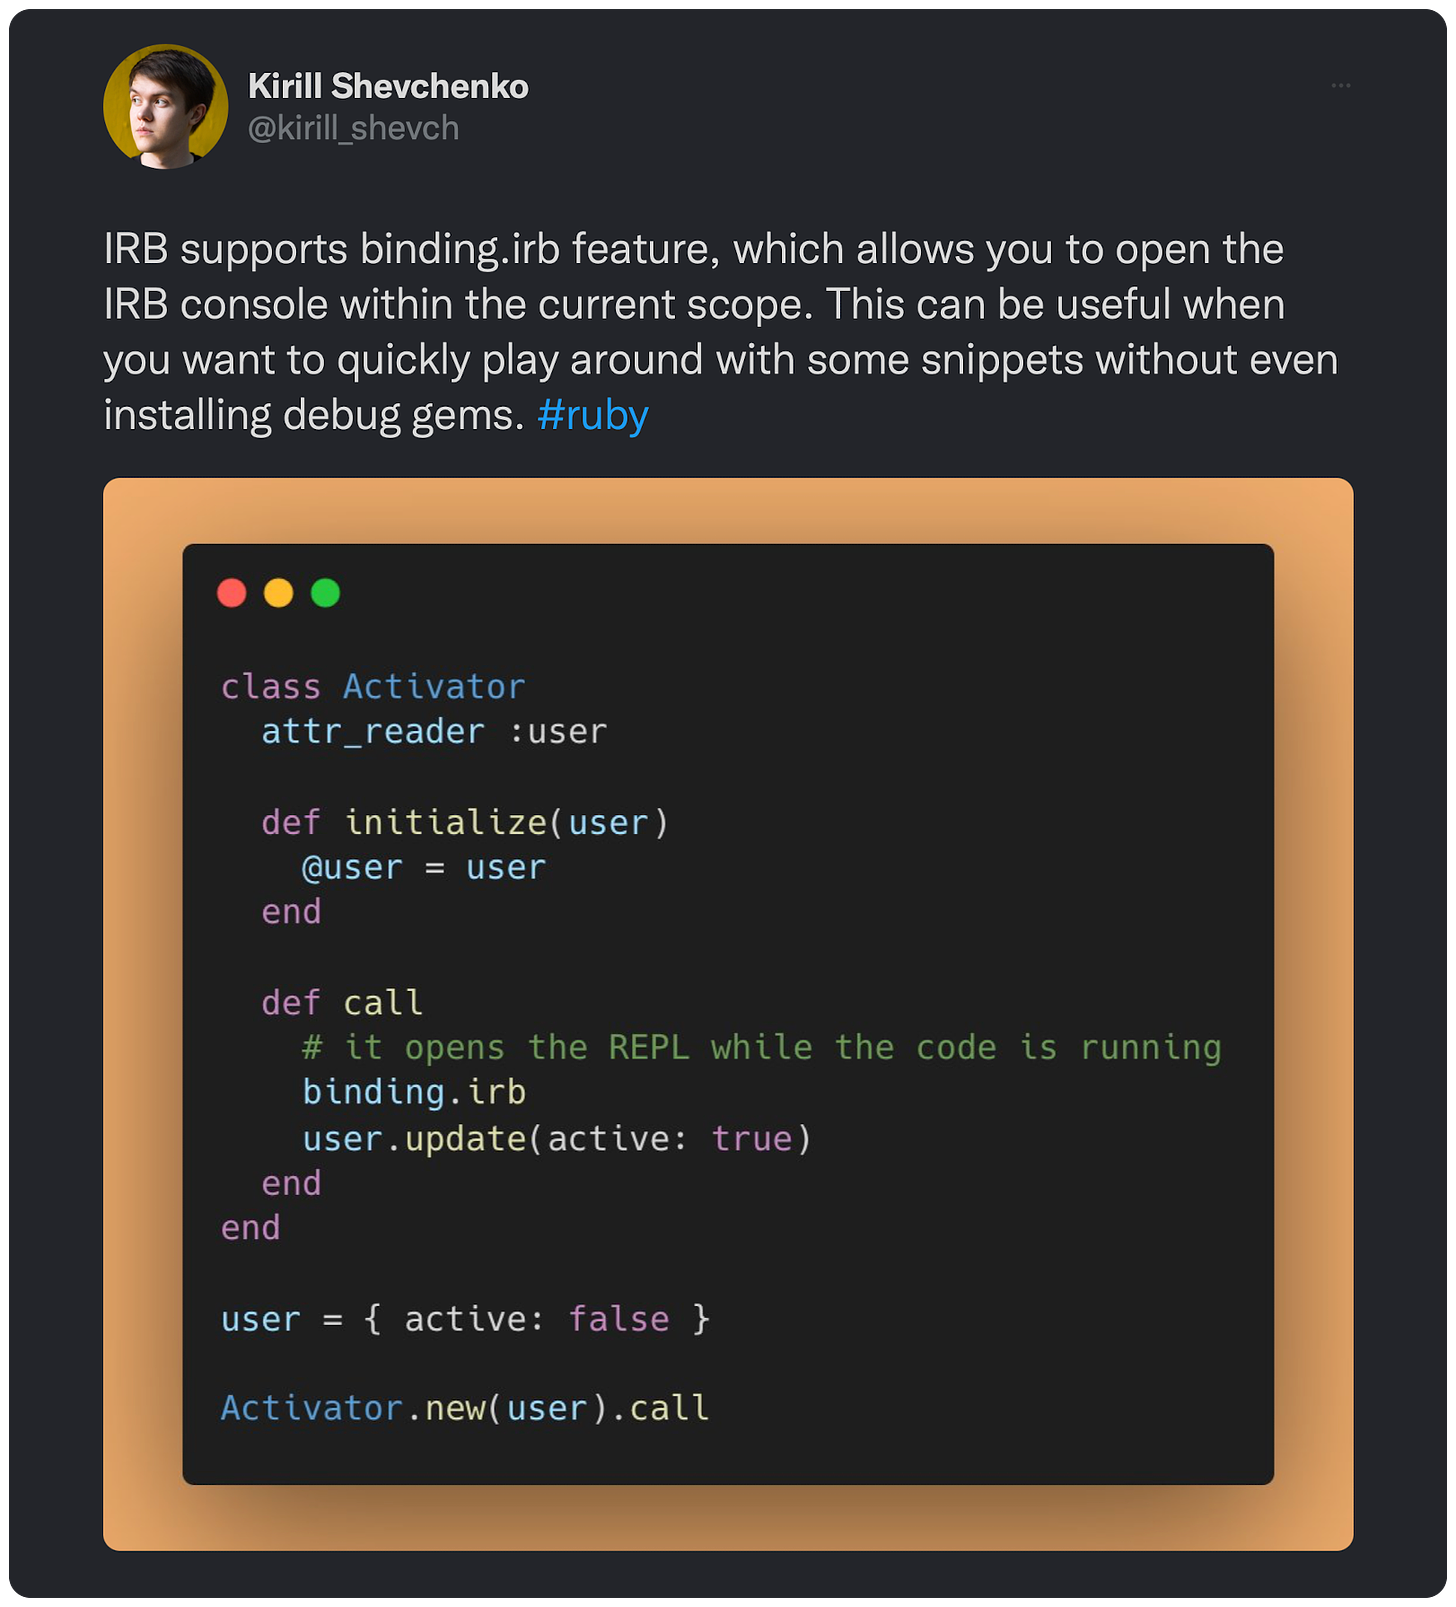 IRB supports binding.irb feature, which allows you to open the IRB console within the current scope. This can be useful when you want to quickly play around with some snippets without even installing debug gems. #ruby